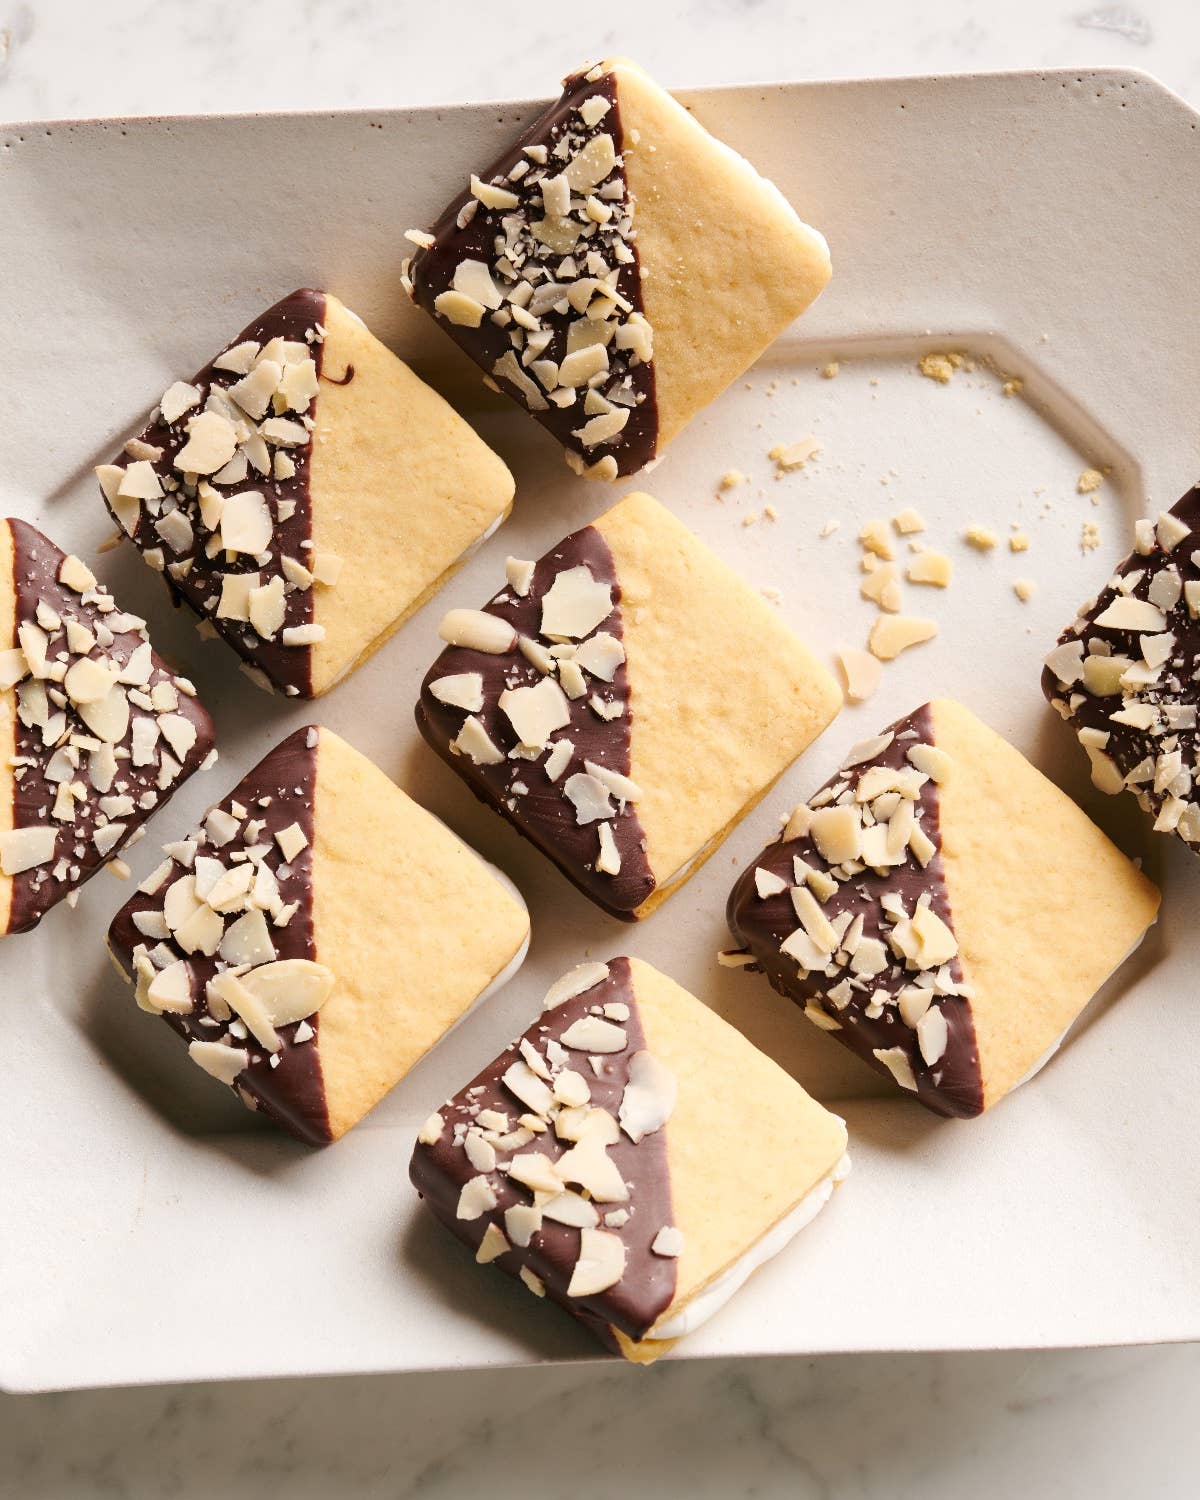 Limonettas (Argentine Lemon Cookies with Chocolate and Almond)